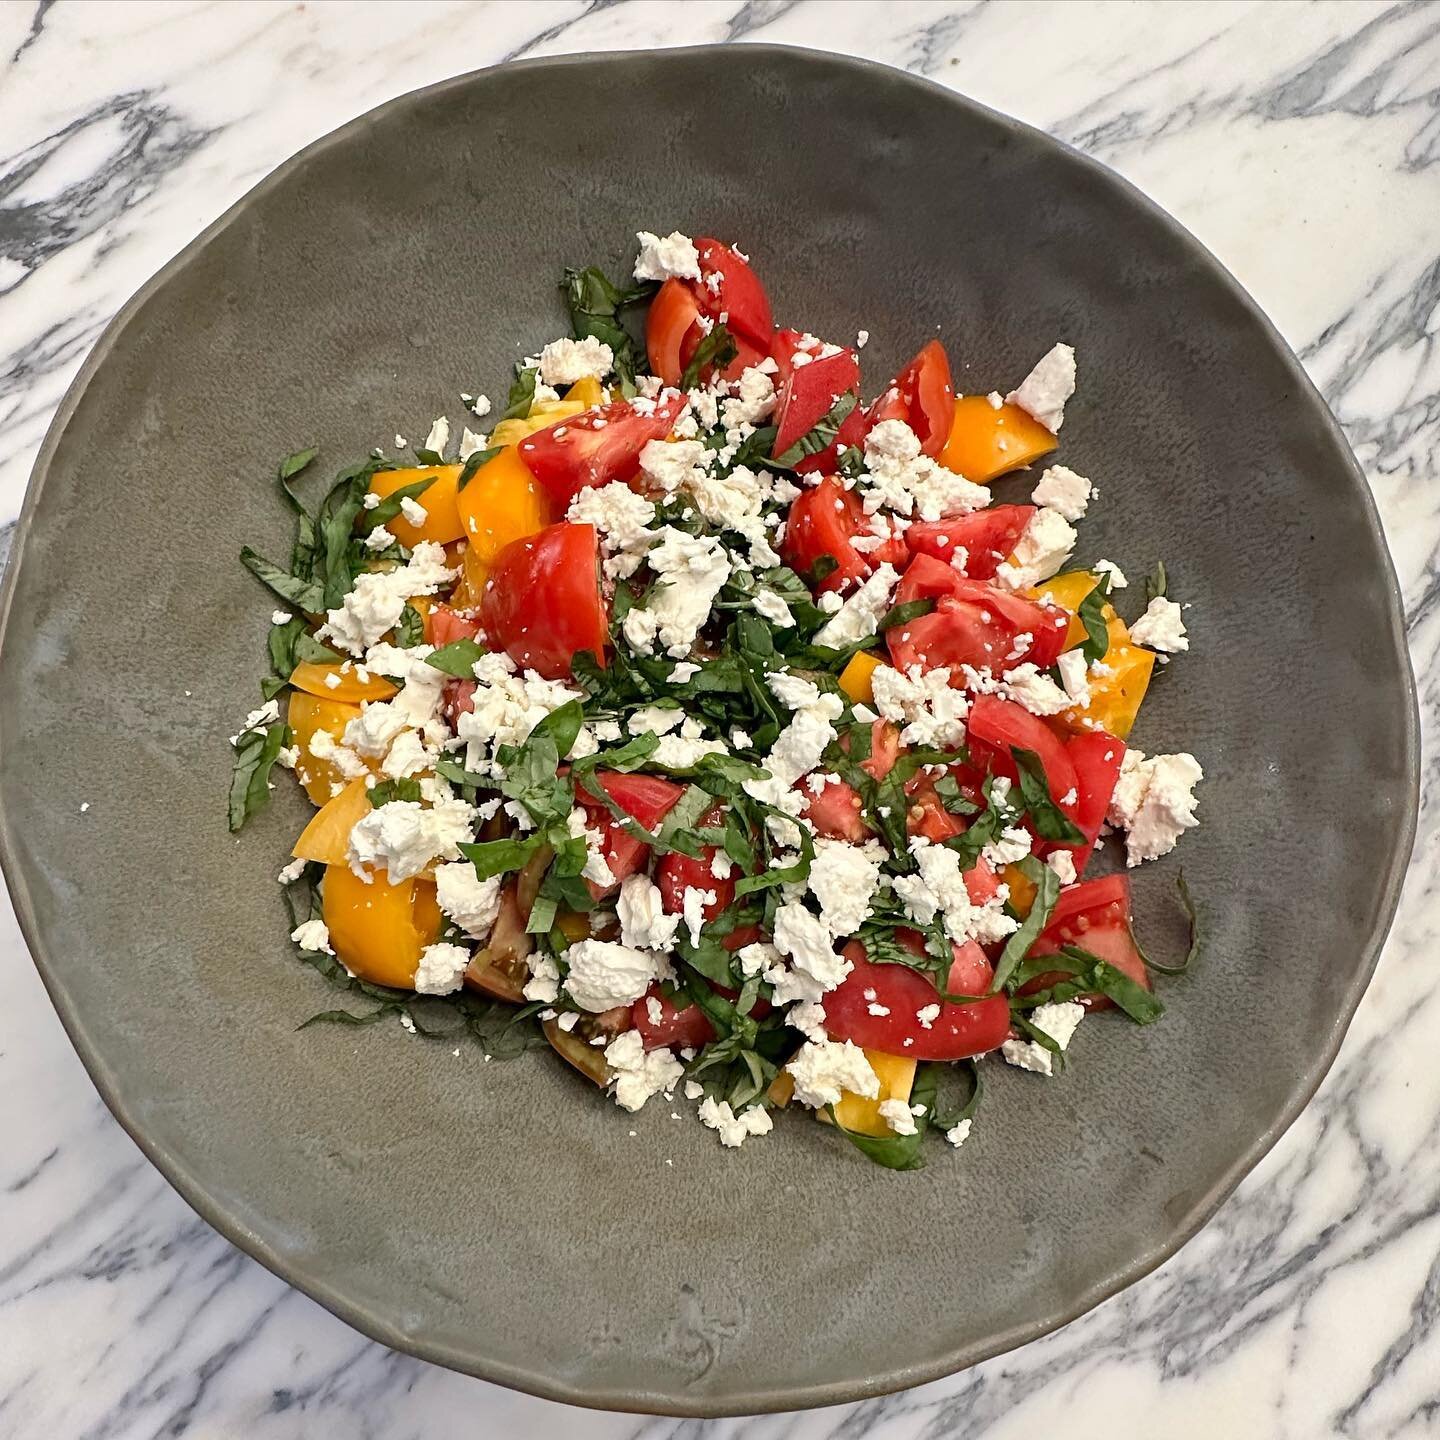 It&rsquo;s tomato season!!! My go to favorite is heirloom tomatoes, basil, feta cheese, Kalamata olives, olive oil, and sea salt!! You can&rsquo;t forget the crusty bread to soak up the juices!! Summertime!!!
Contact us at www.elderberryprovisions.co